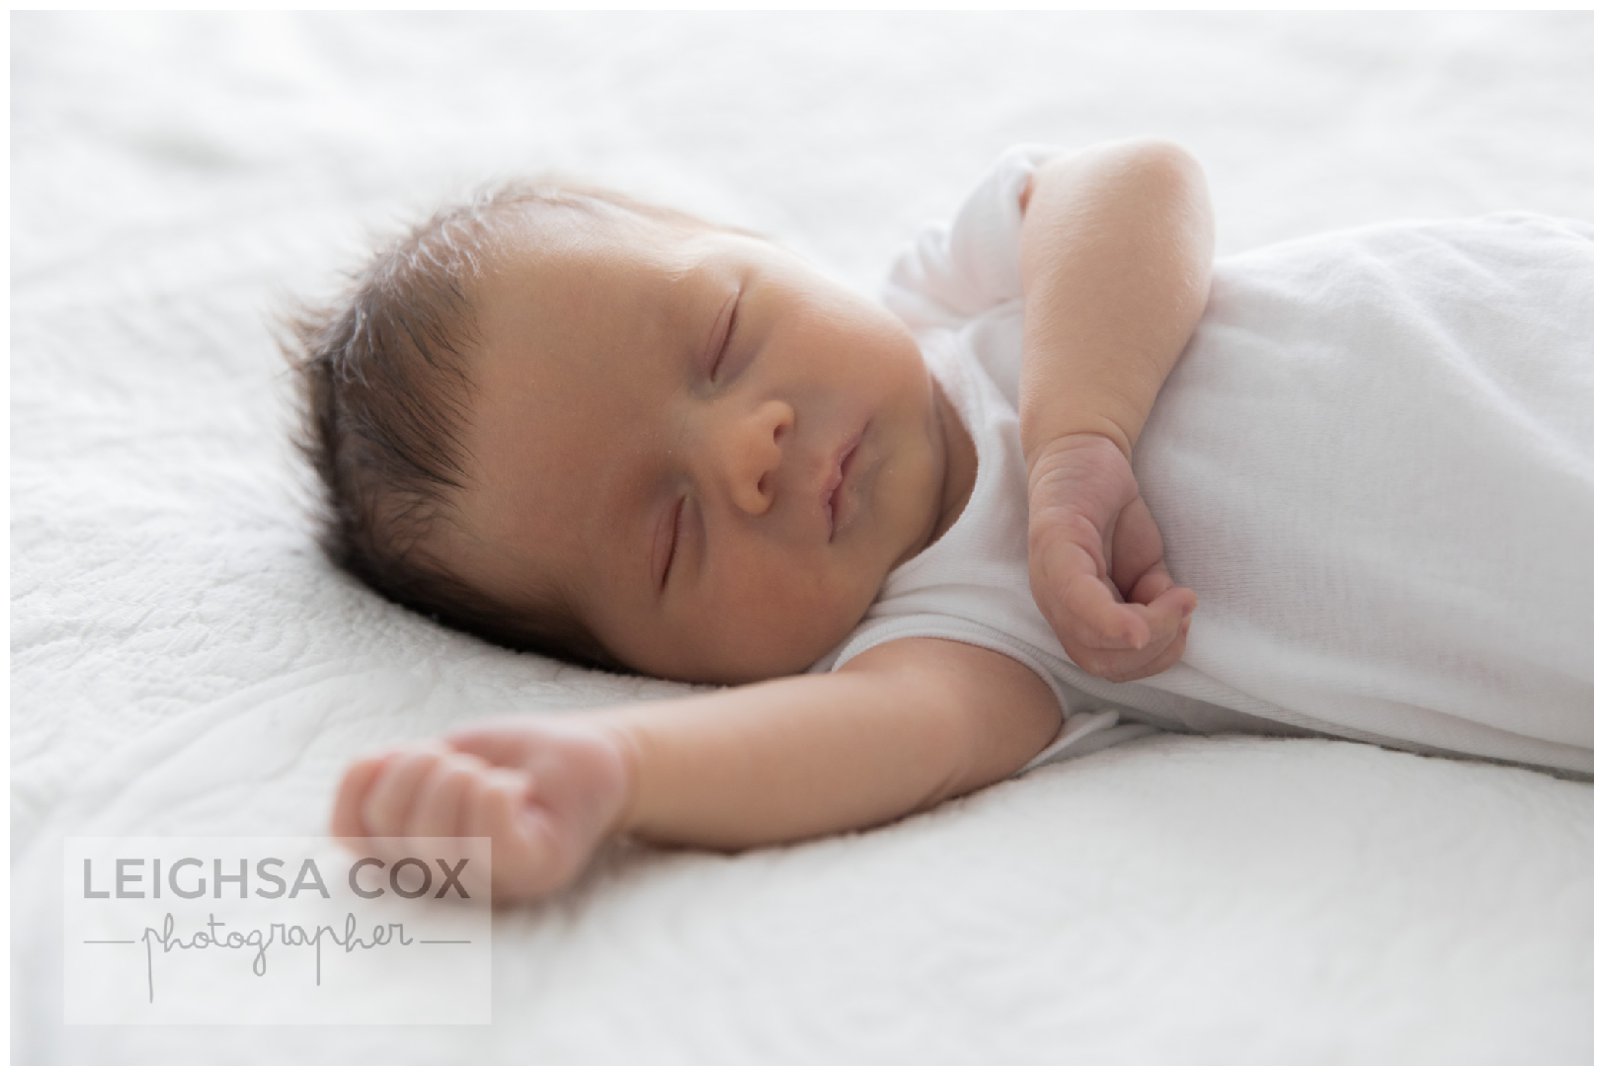 Portrait of newborn baby sleeping peacefully in swaddle surrounded by soft light fabric.